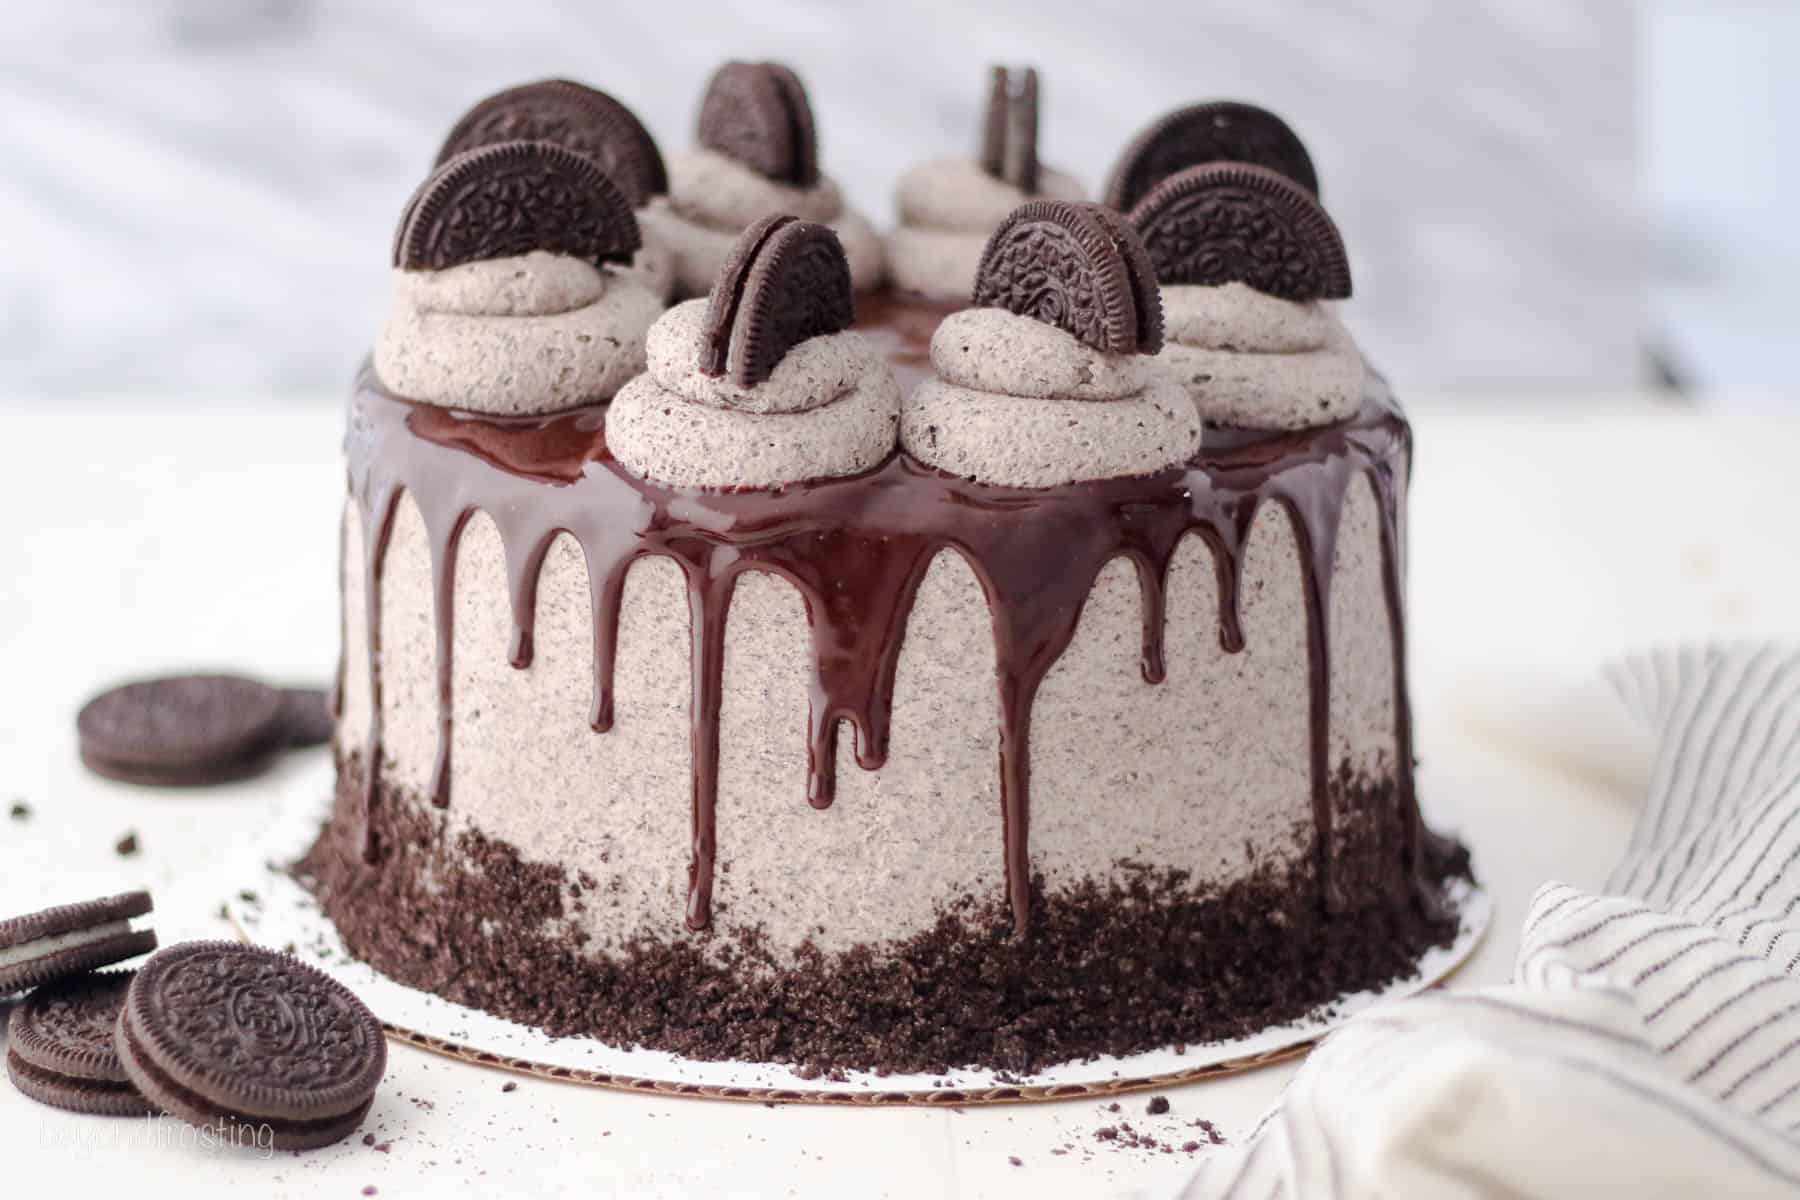 An Oreo cookies and cream cake on a cake plate decorated with a chocolate drizzle, swirls of Oreo frosting, and Oreo cookies.